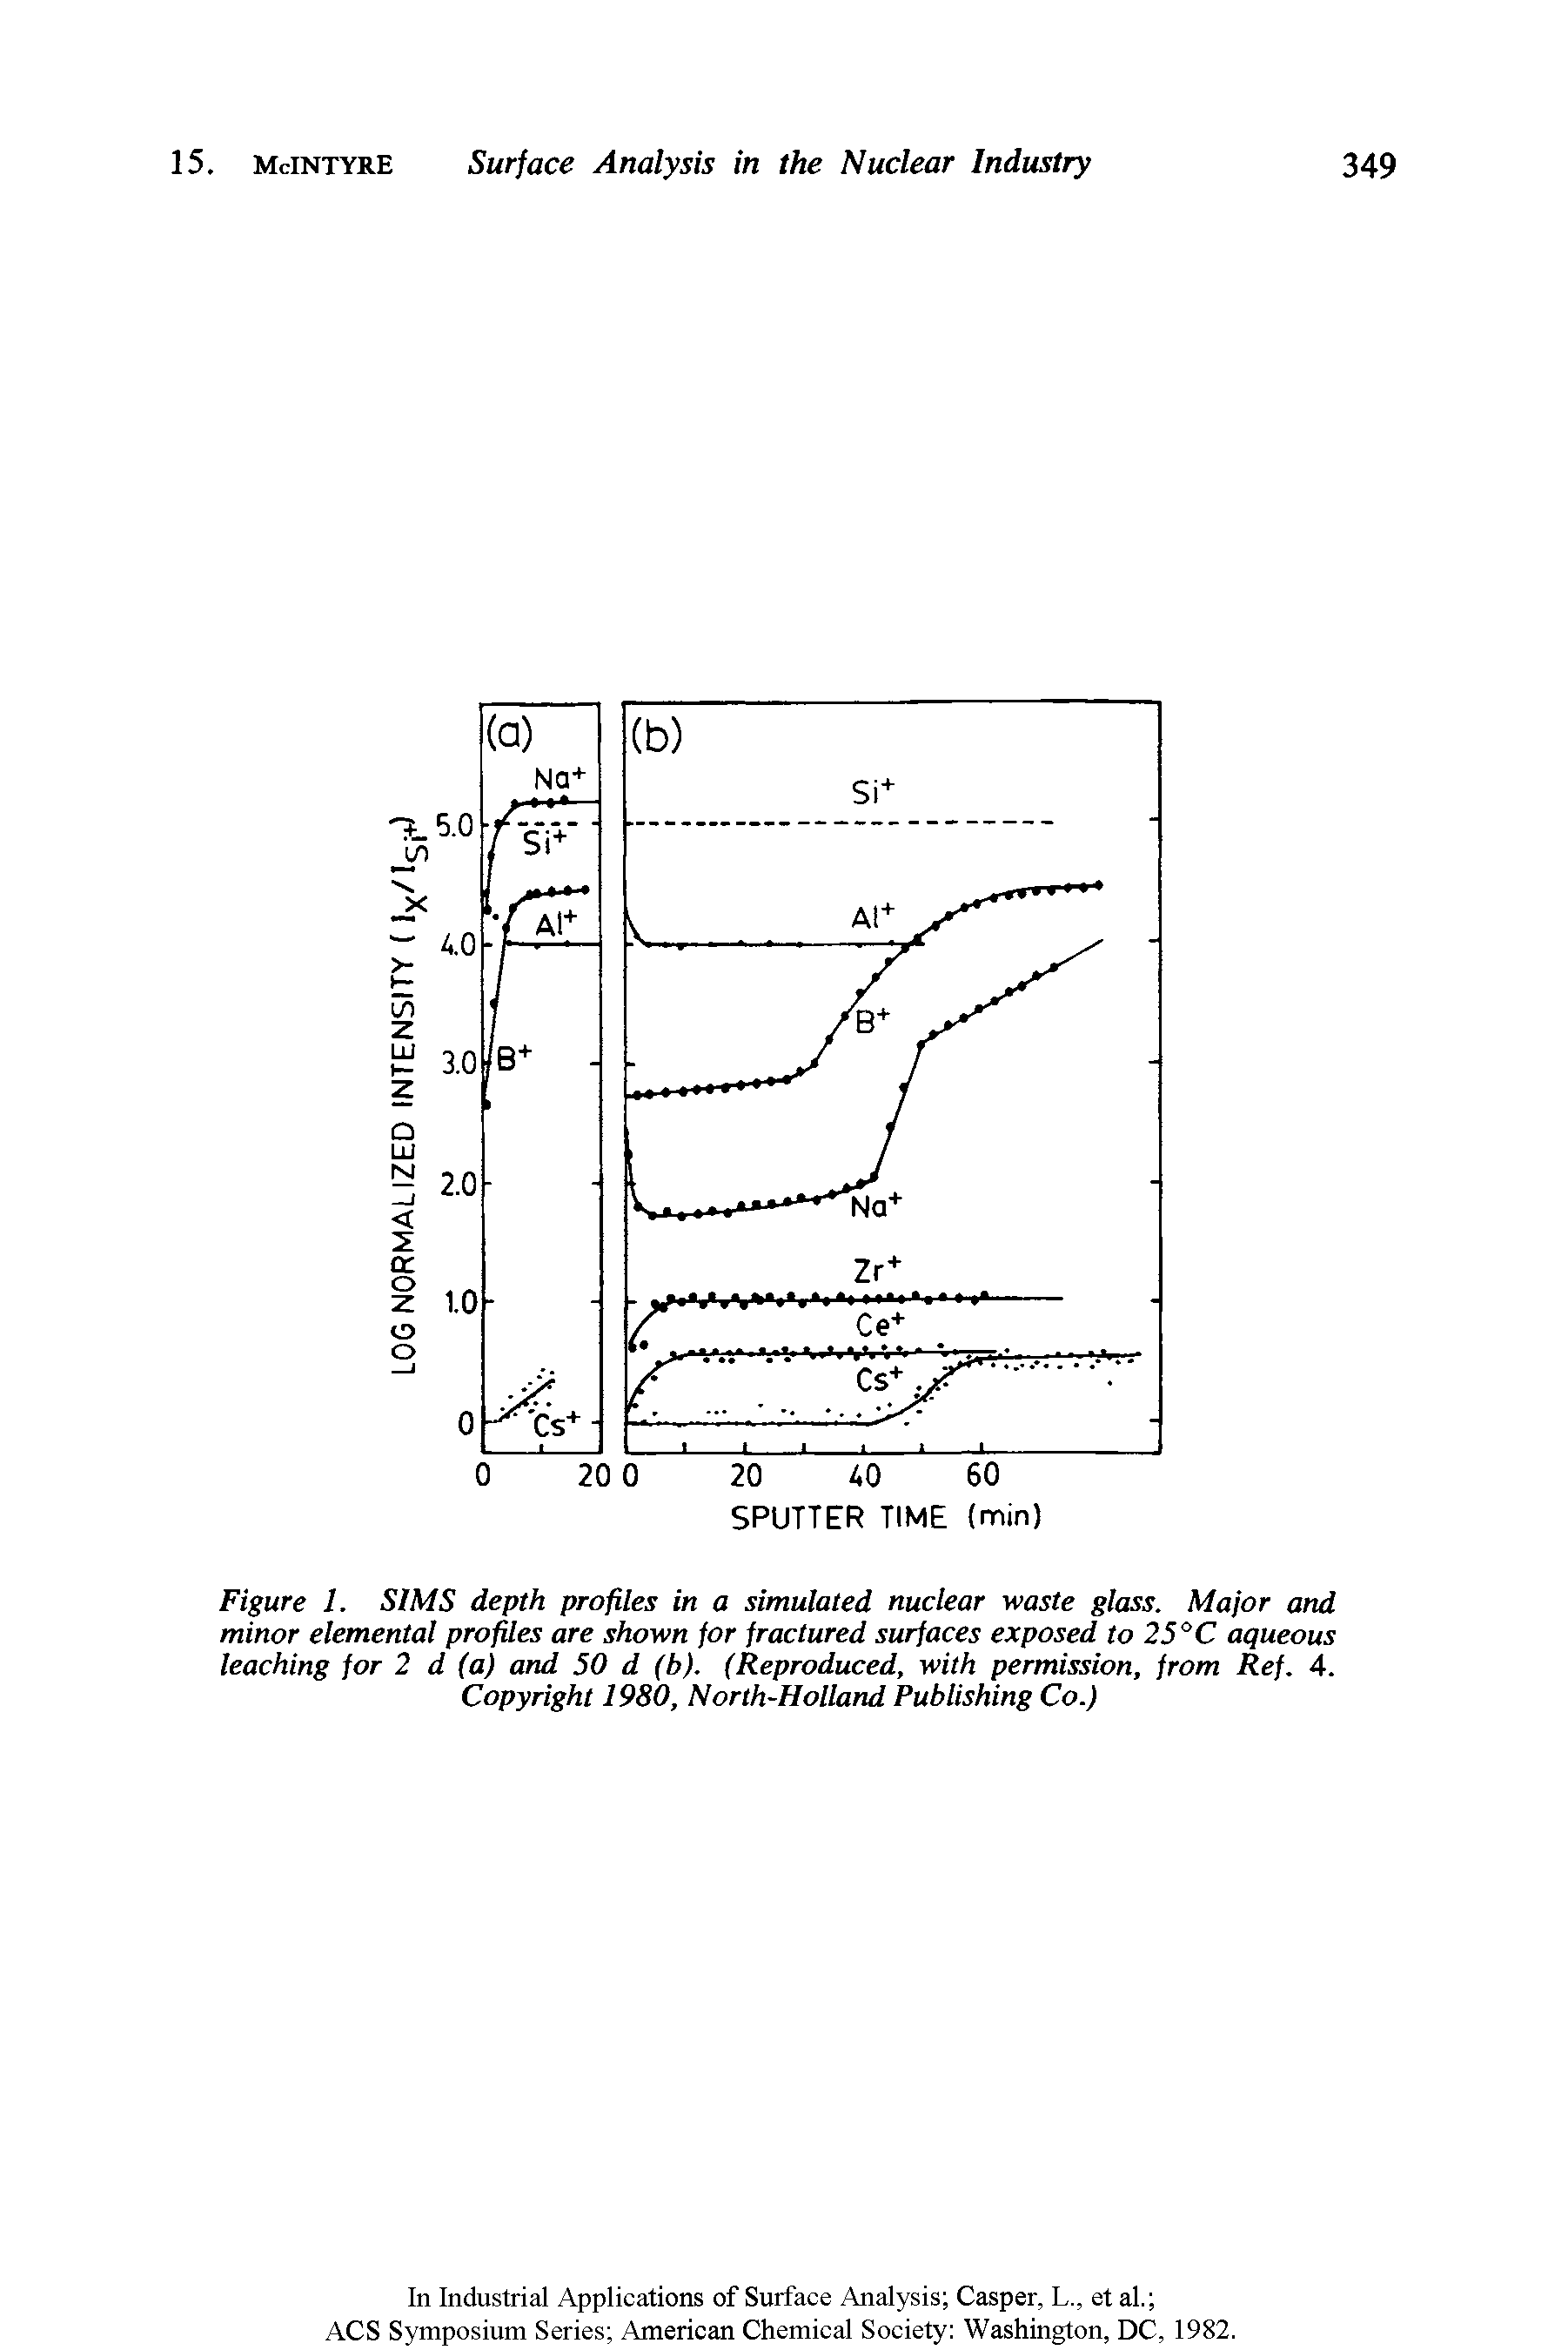 Figure 1. SIMS depth profiles in a simulated nuclear waste glass. Major and minor elemental profiles are shown for fractured surfaces exposed to 25° C aqueous leaching for 2 d (a) and 50 d (b). (Reproduced, with permission, from Ref. 4. Copyright 1980, North-Holland Publishing Co.)...